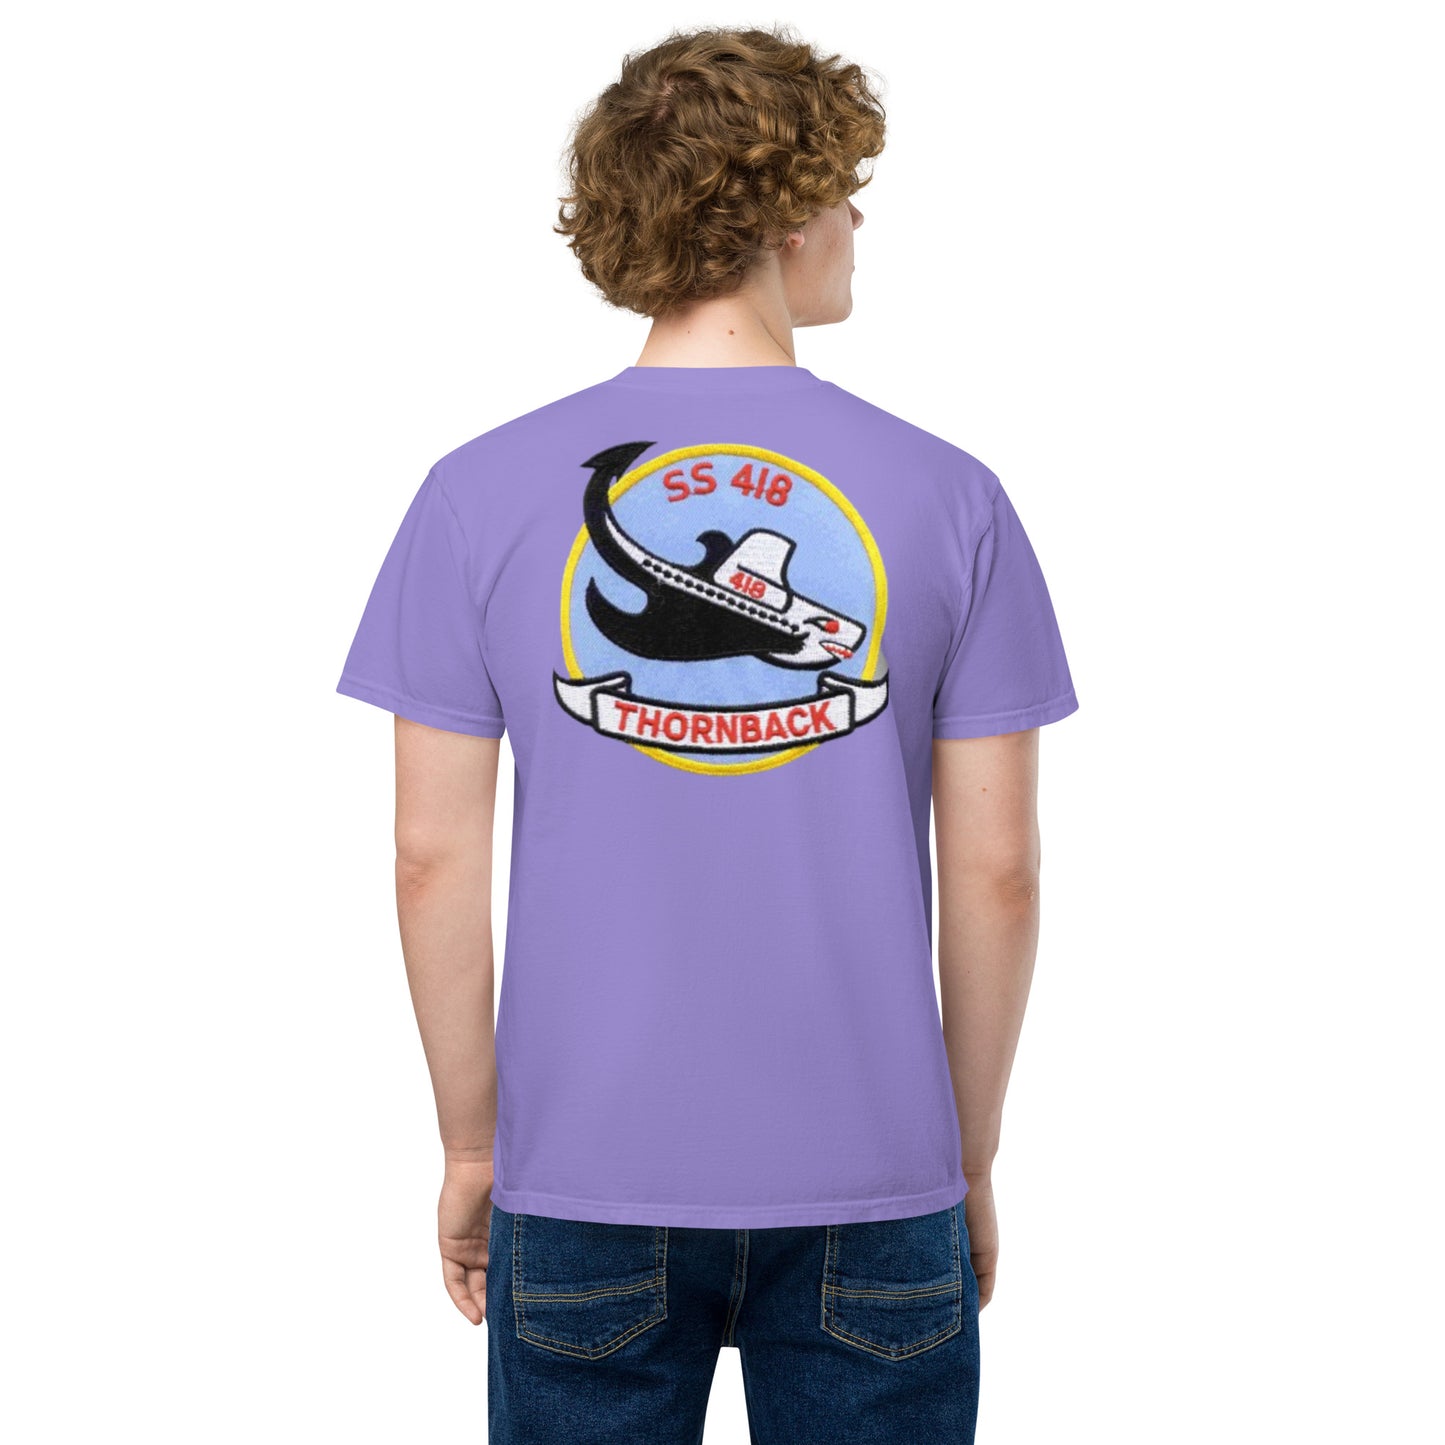 "THE BARNEY" a Tribute Tee